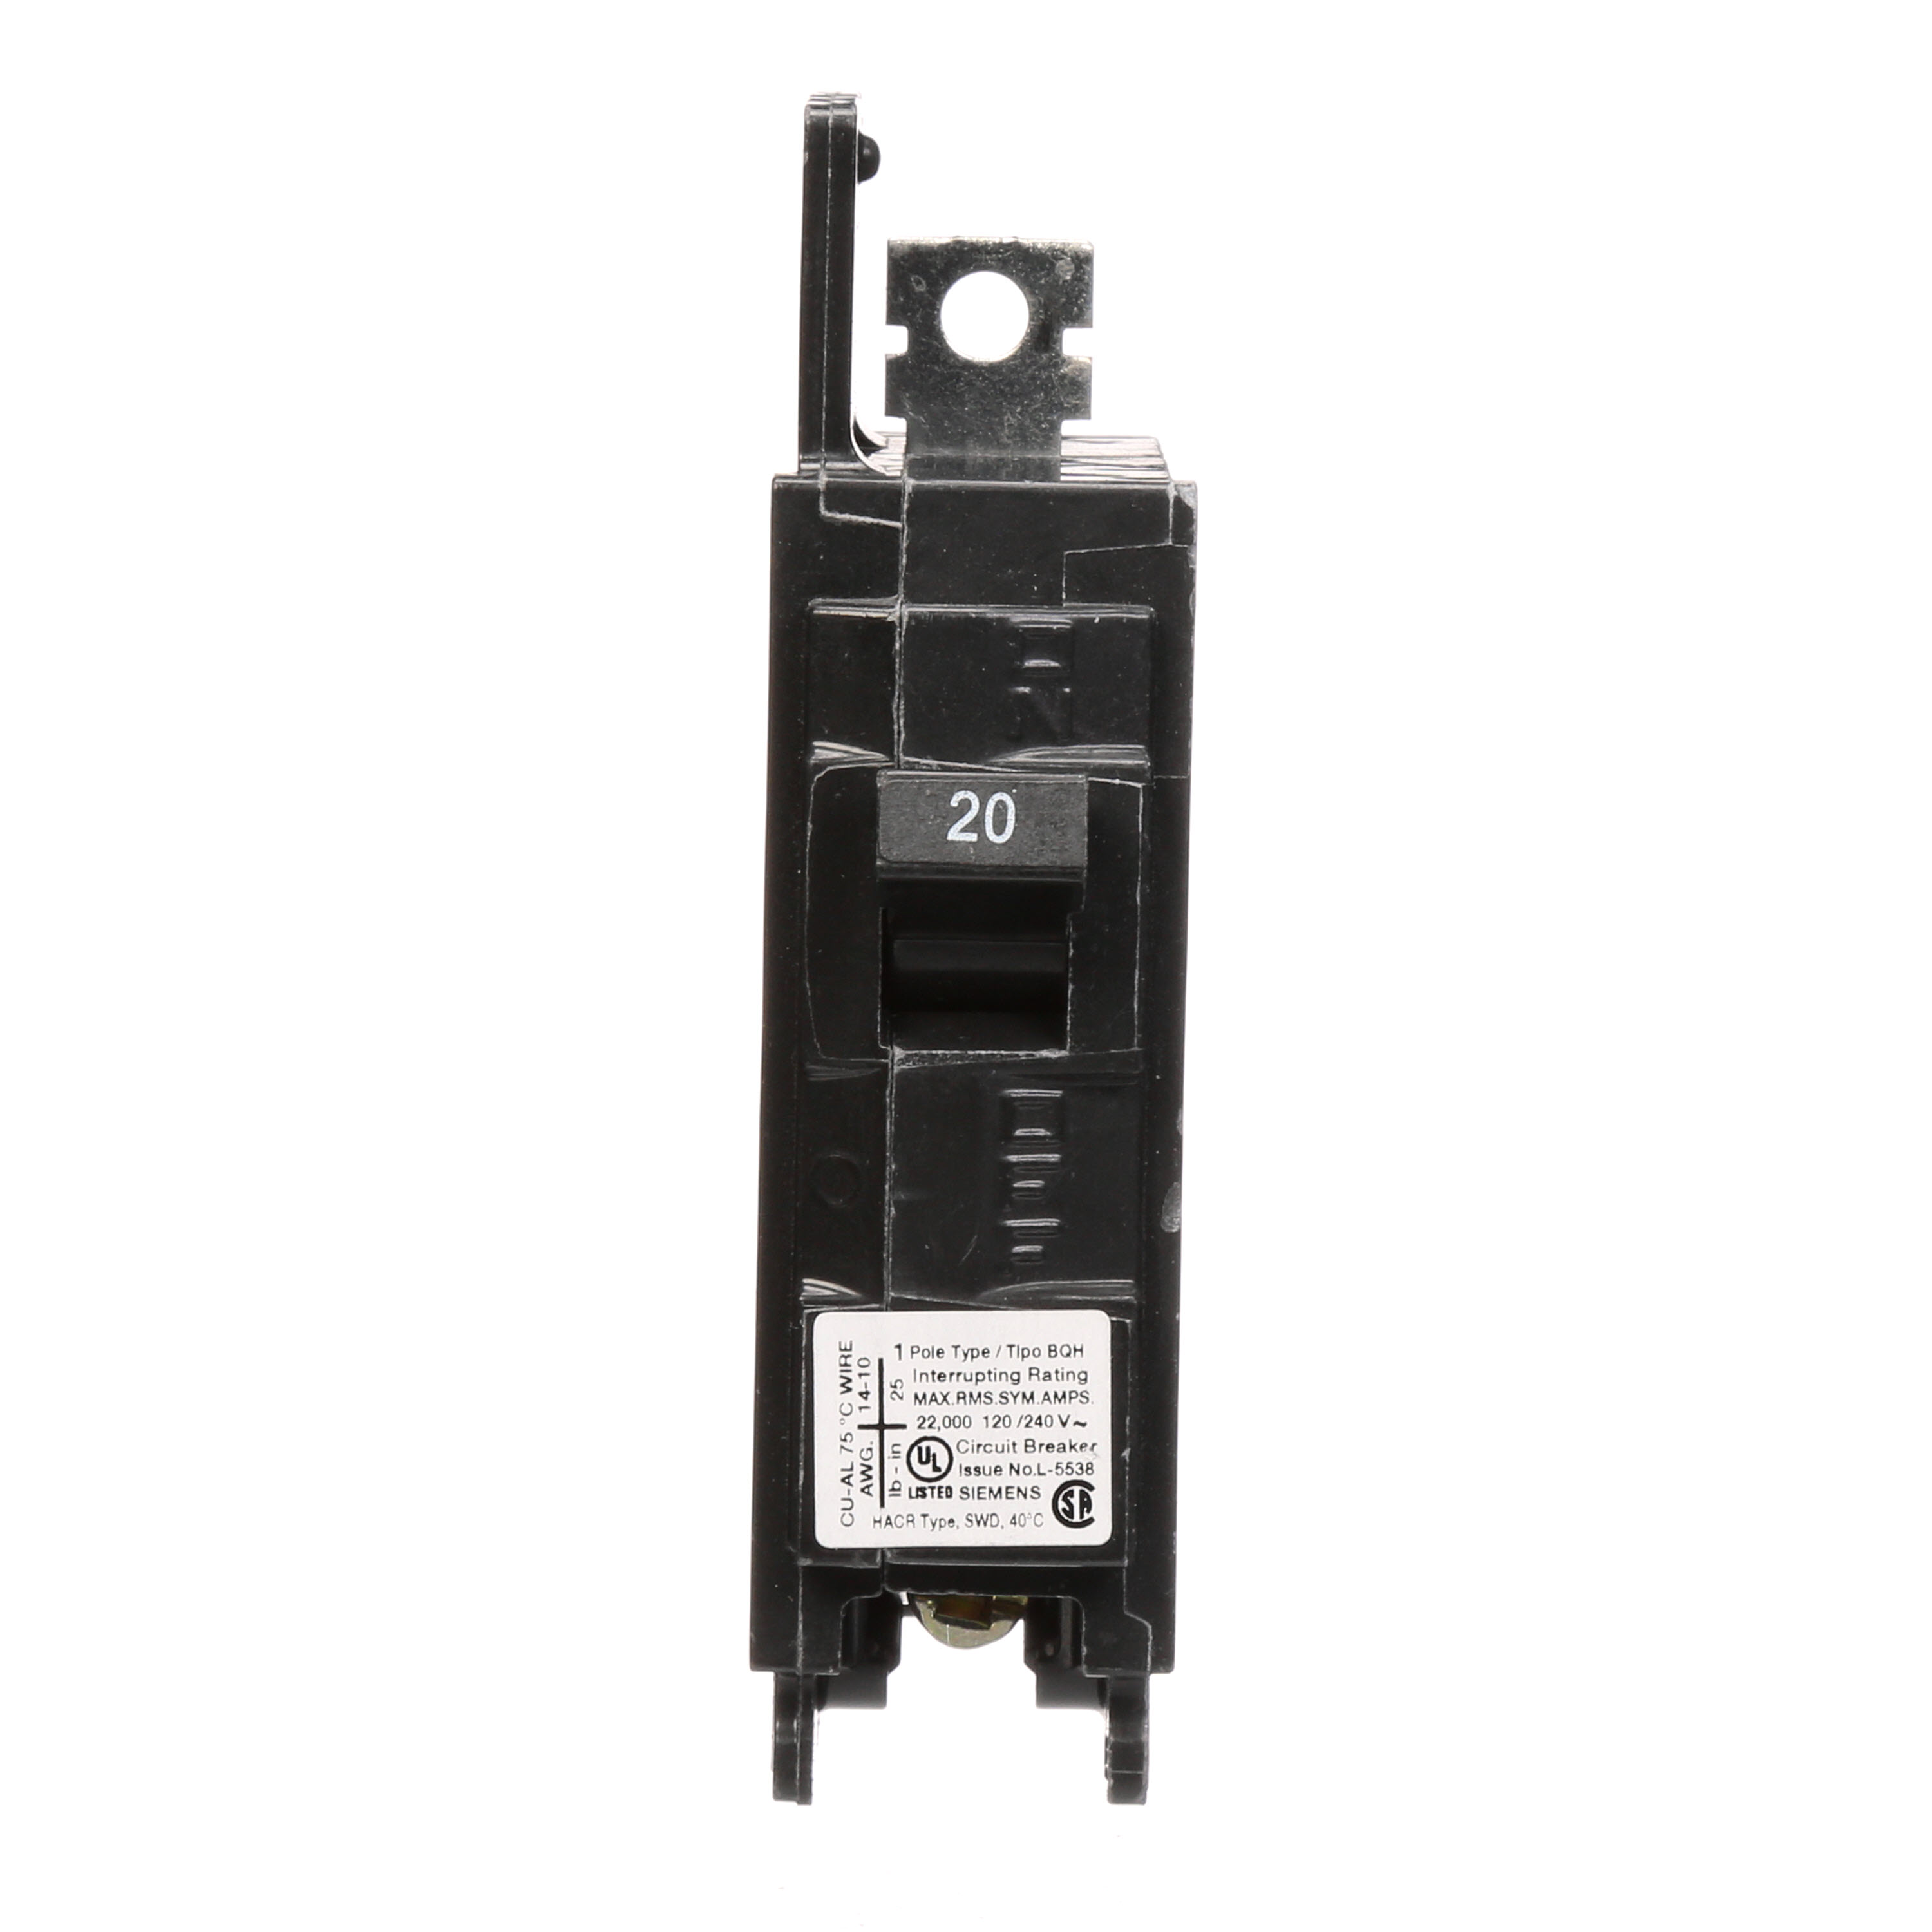 Siemens Low Voltage Molded Case Circuit Breakers General Purpose MCCBs are Circuit Protection Molded Case Circuit Breakers. 1-Pole circuit breaker type BQH. Rated 120V (020A) (AIR 22 kA). Special features Load side lugs are included.